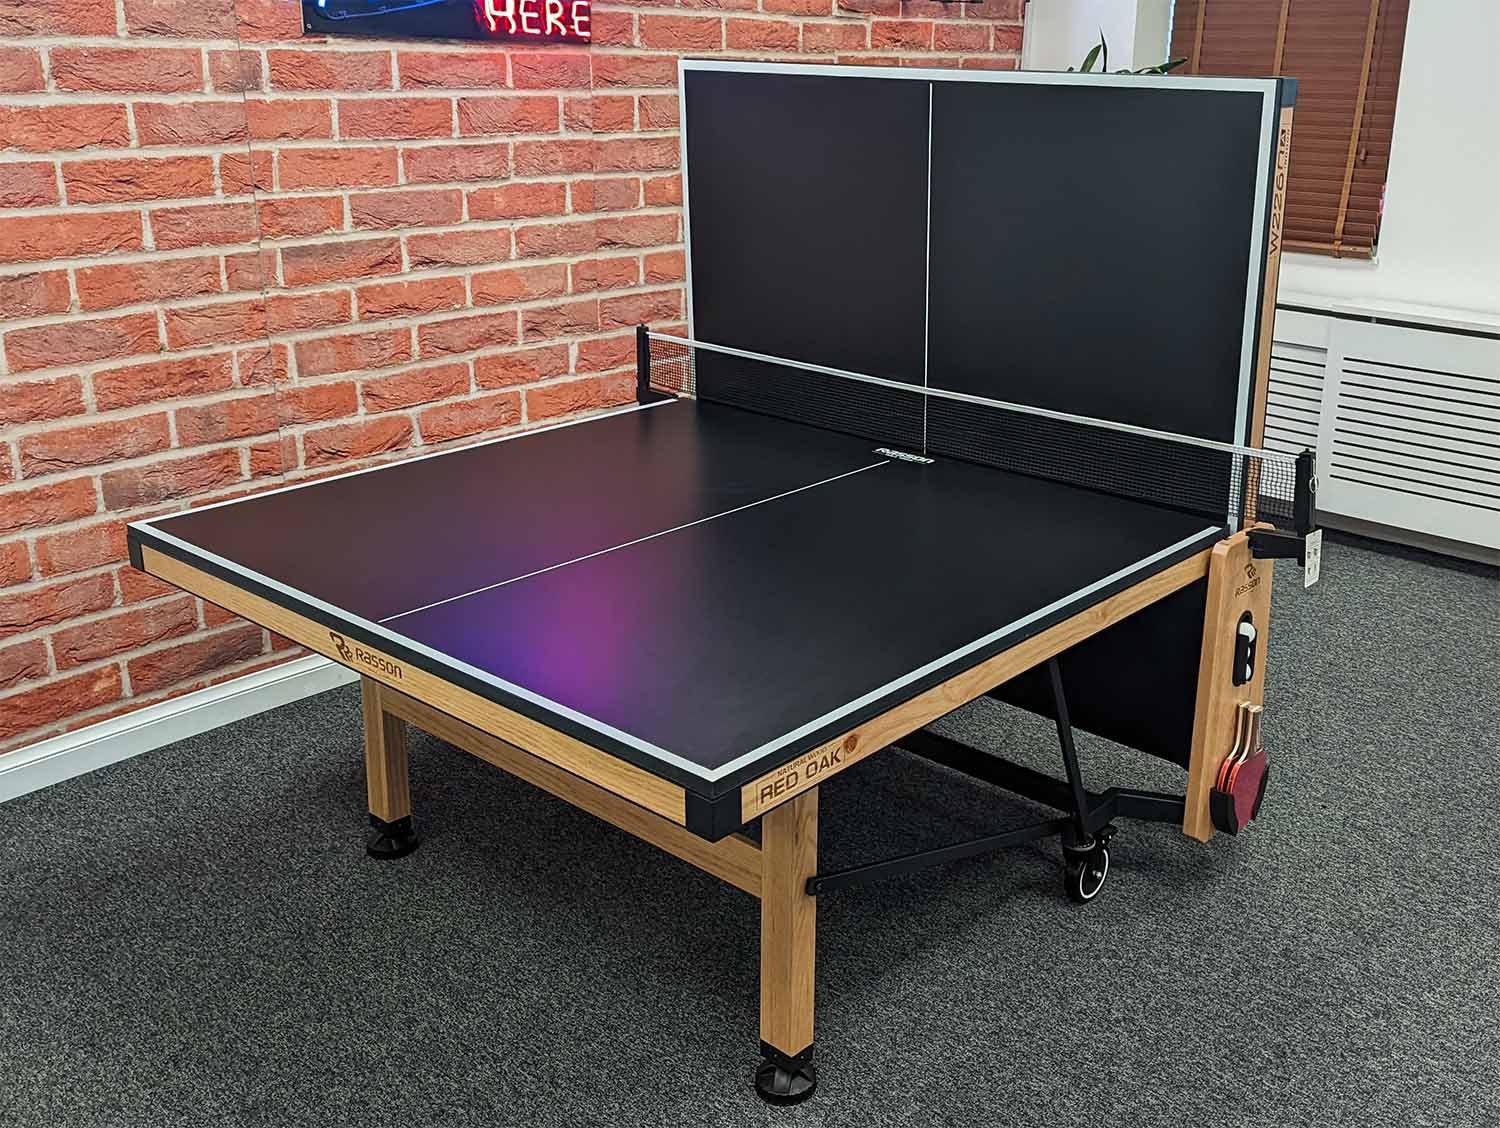 rasson-w2260a-table-tennis-table-folding-indoor-body-image.jpg